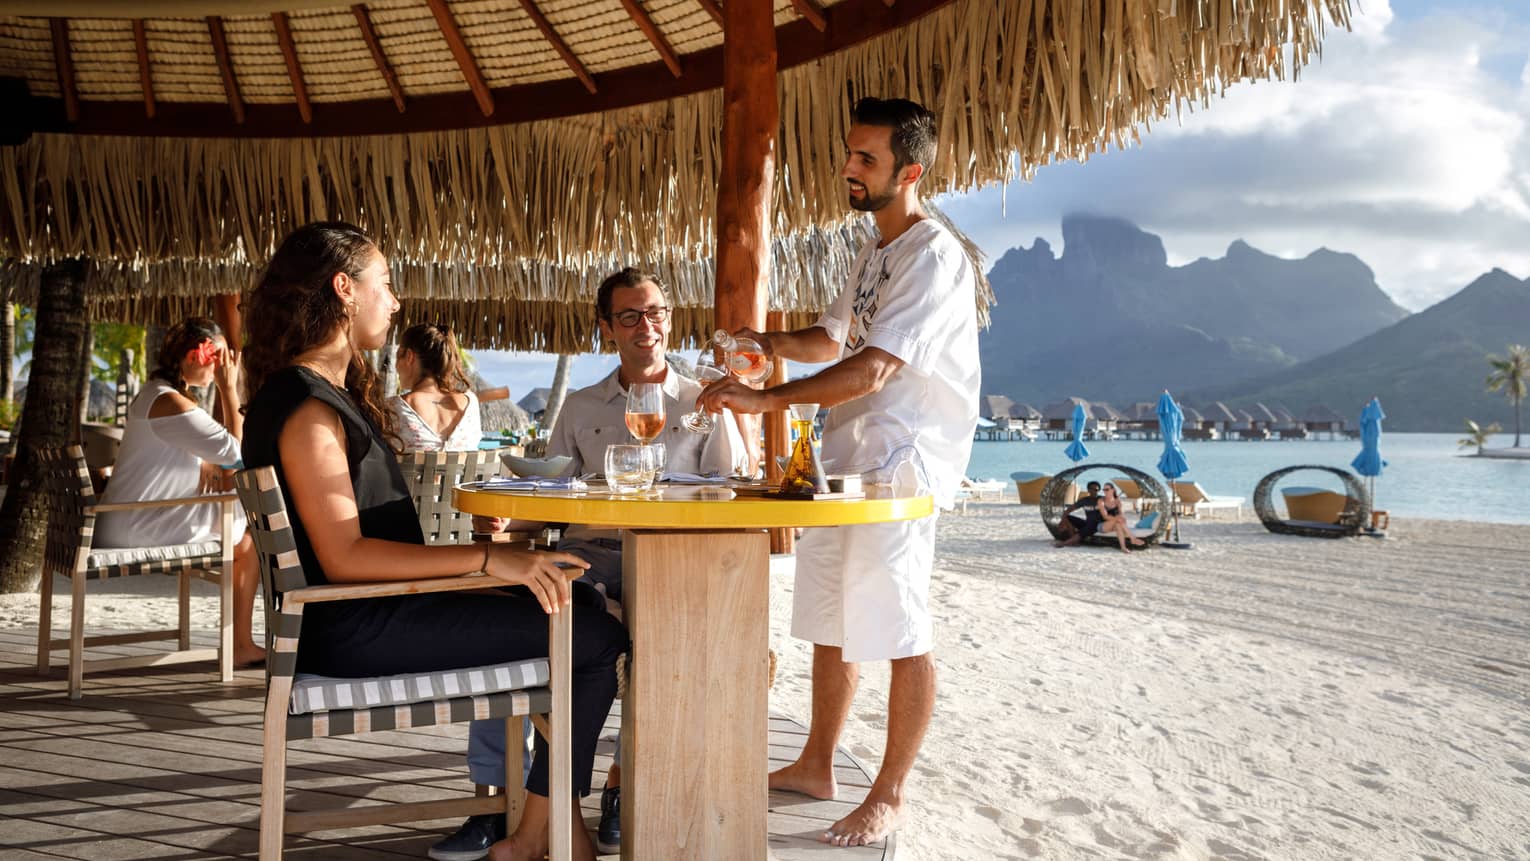 Staff refills wine for couple at patio table on white sand beach